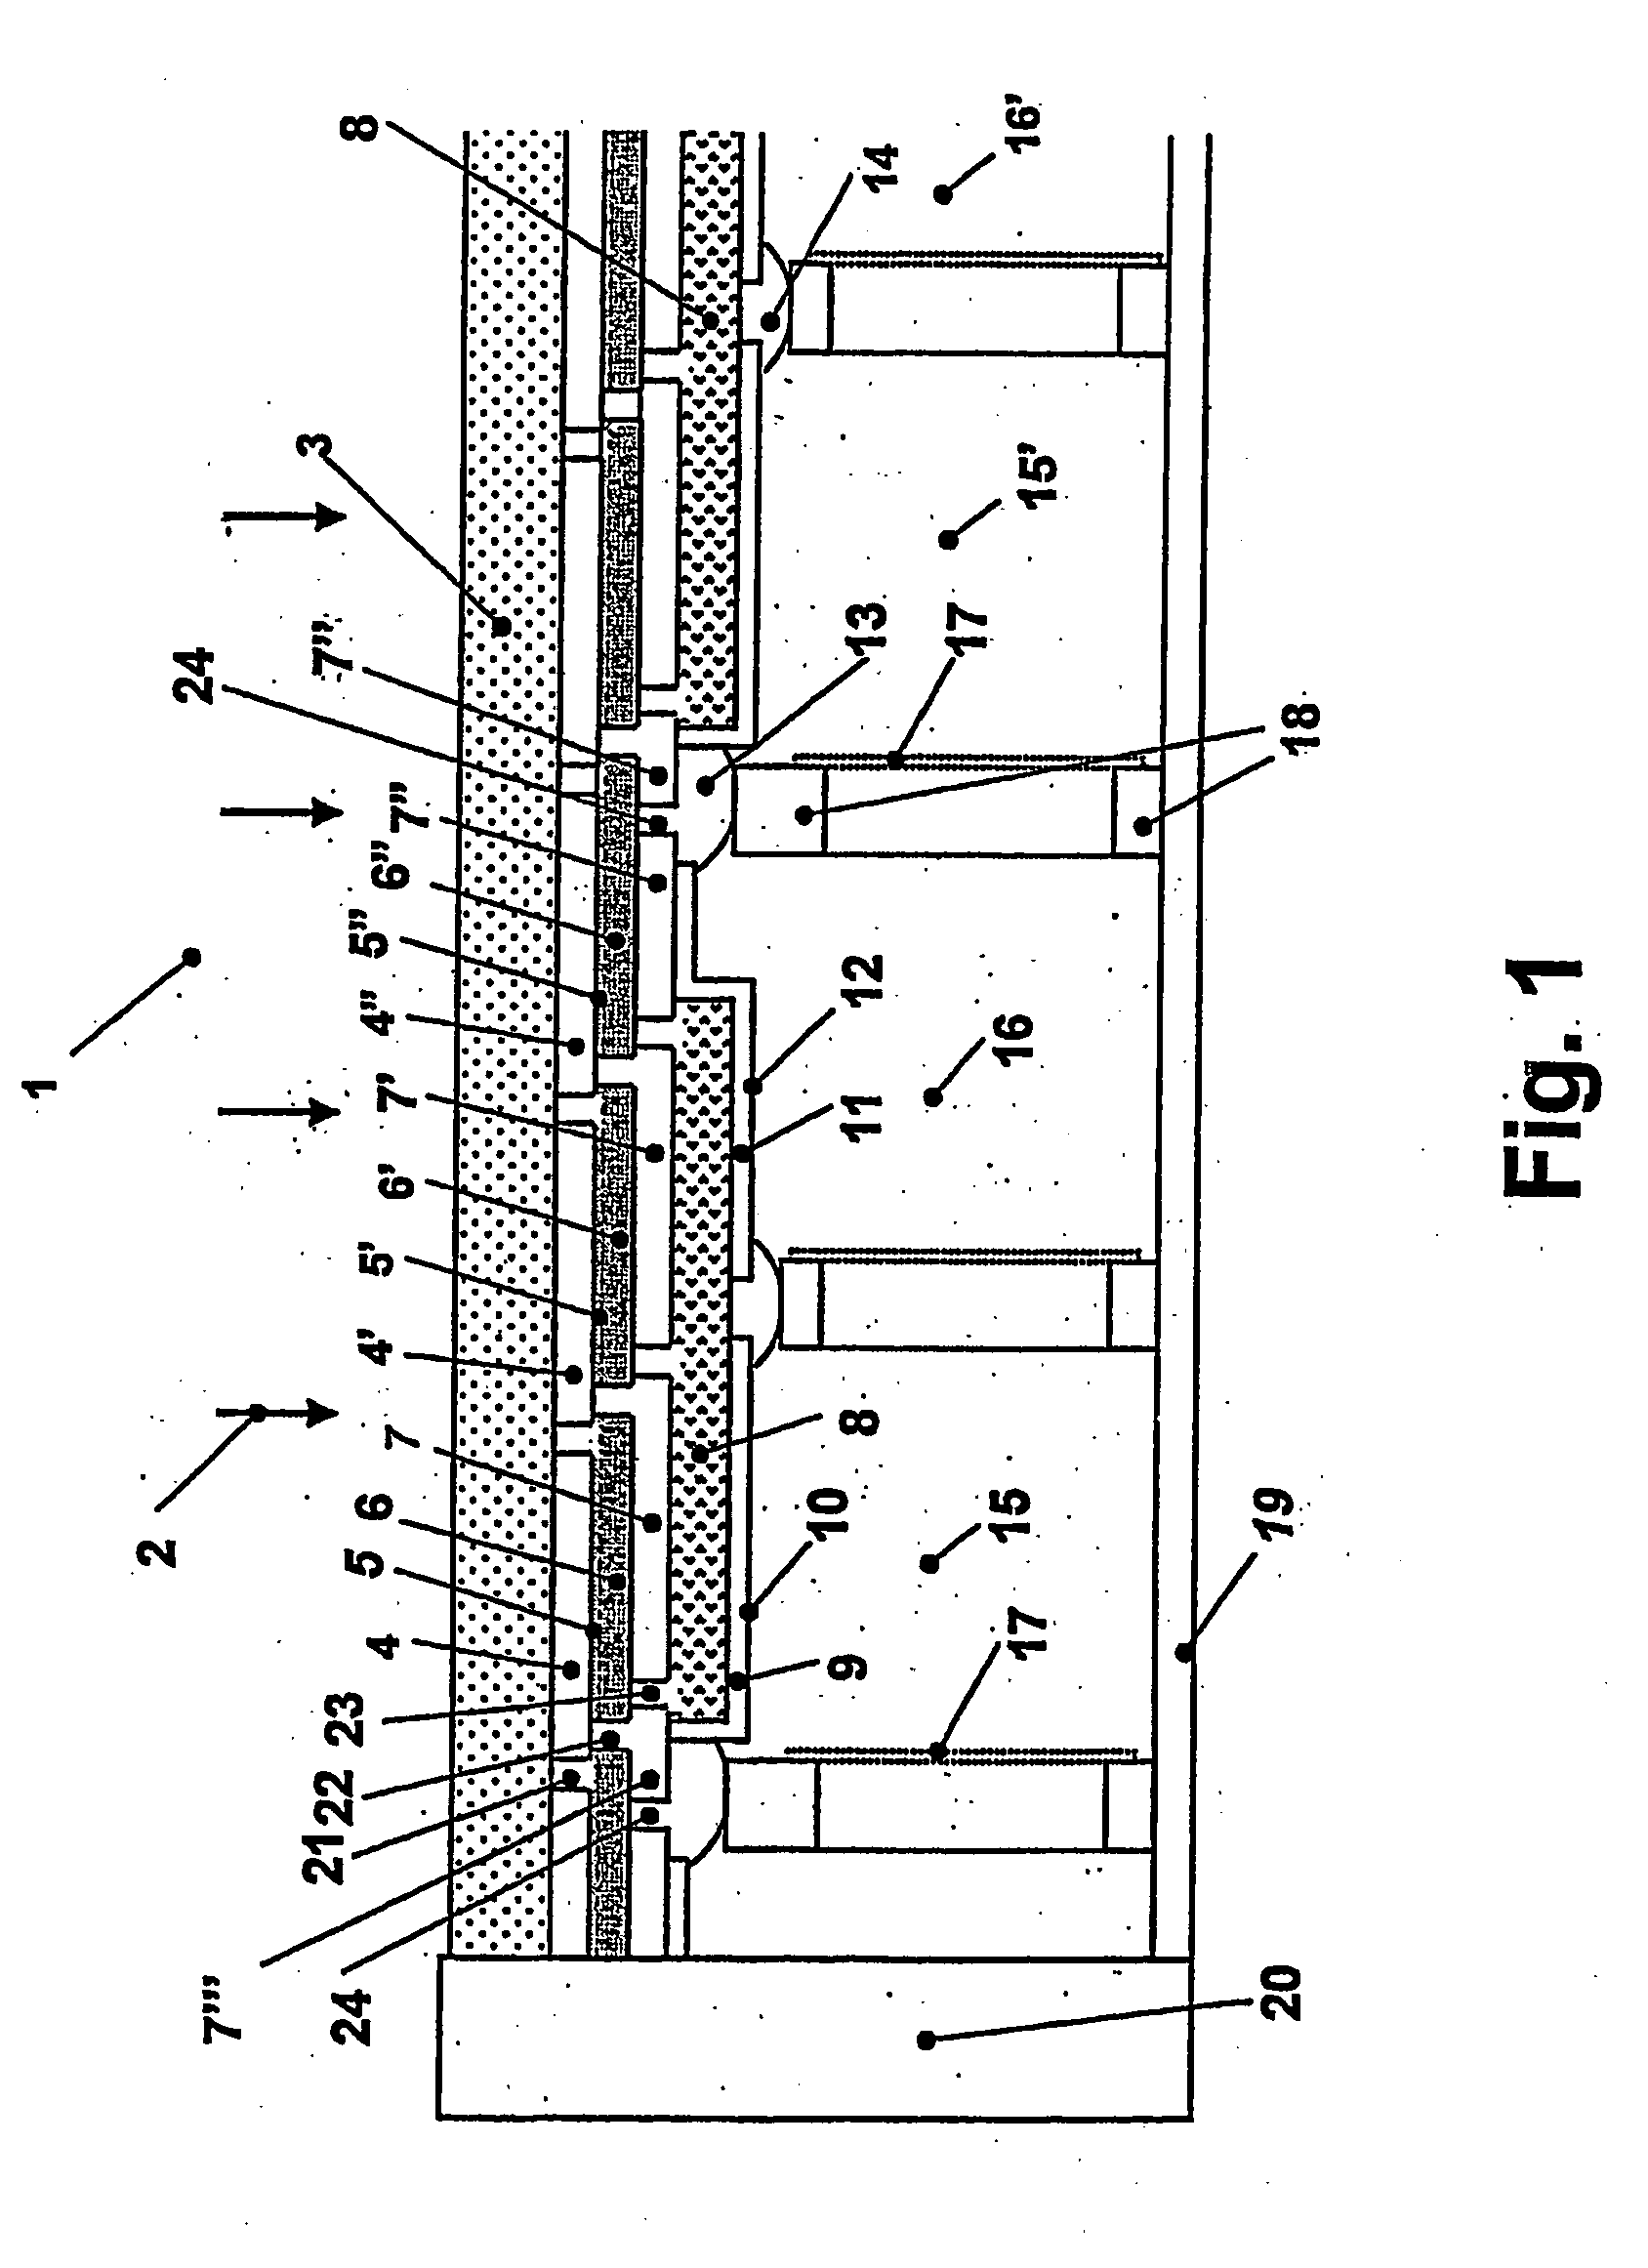 Interconnected Photoelectrochemical Cell